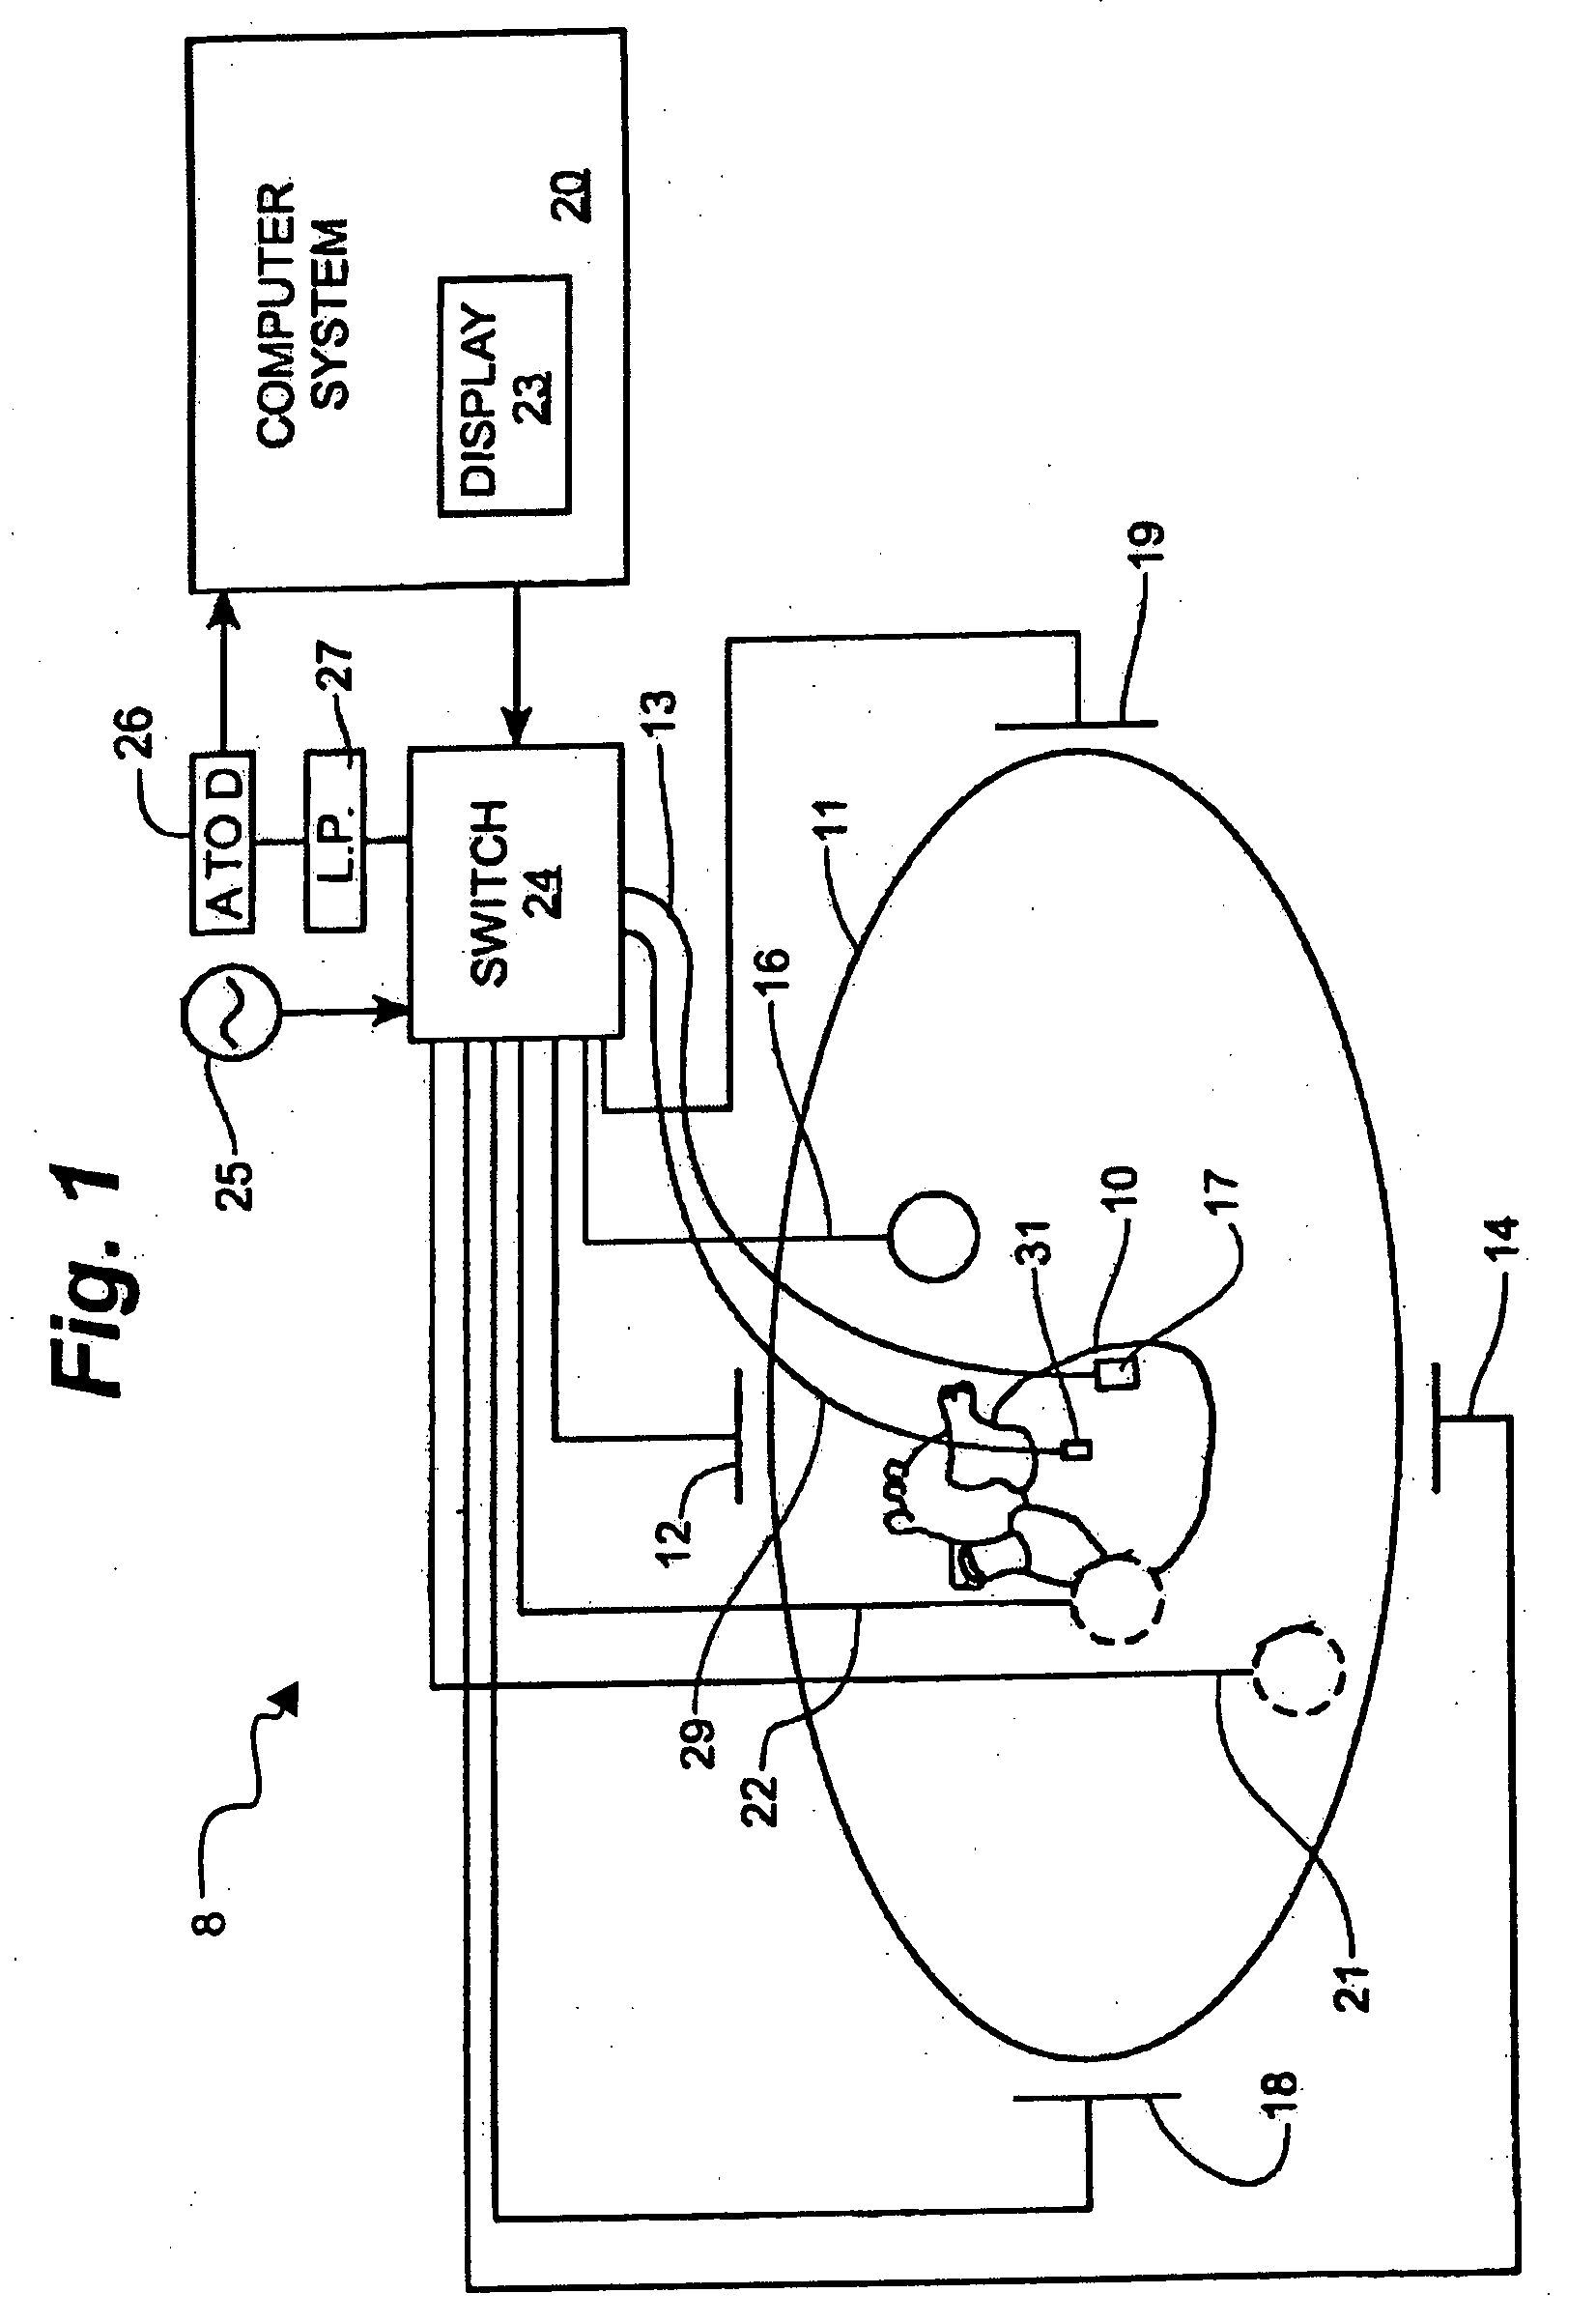 System and method for local deformable registration of a catheter navigation system to image data or a model